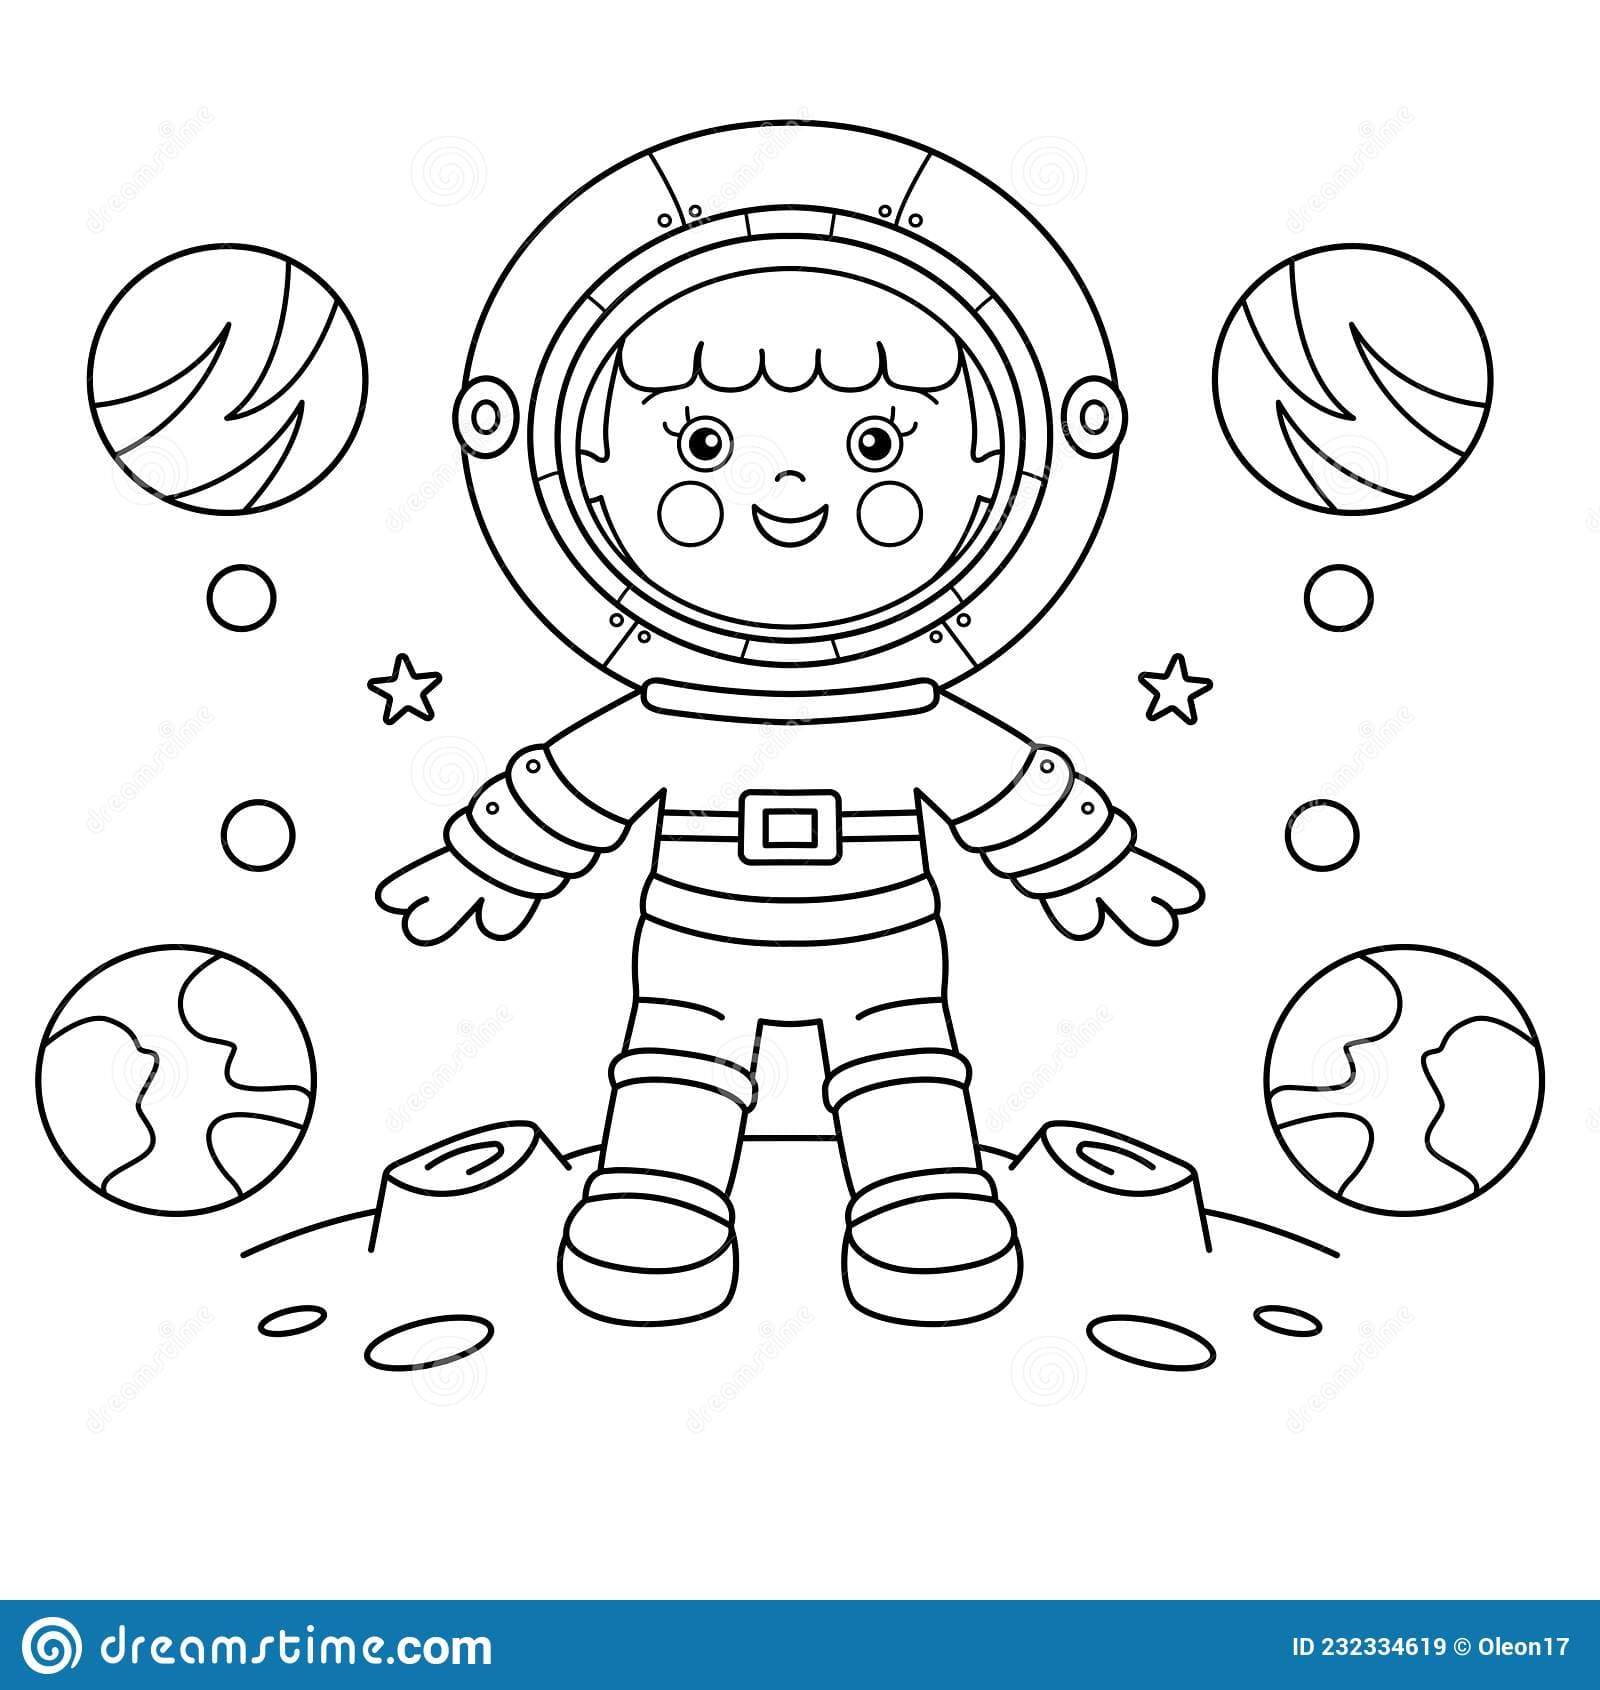 Coloring Page Outline Of a cartoon astronaut in spacesuit on planet